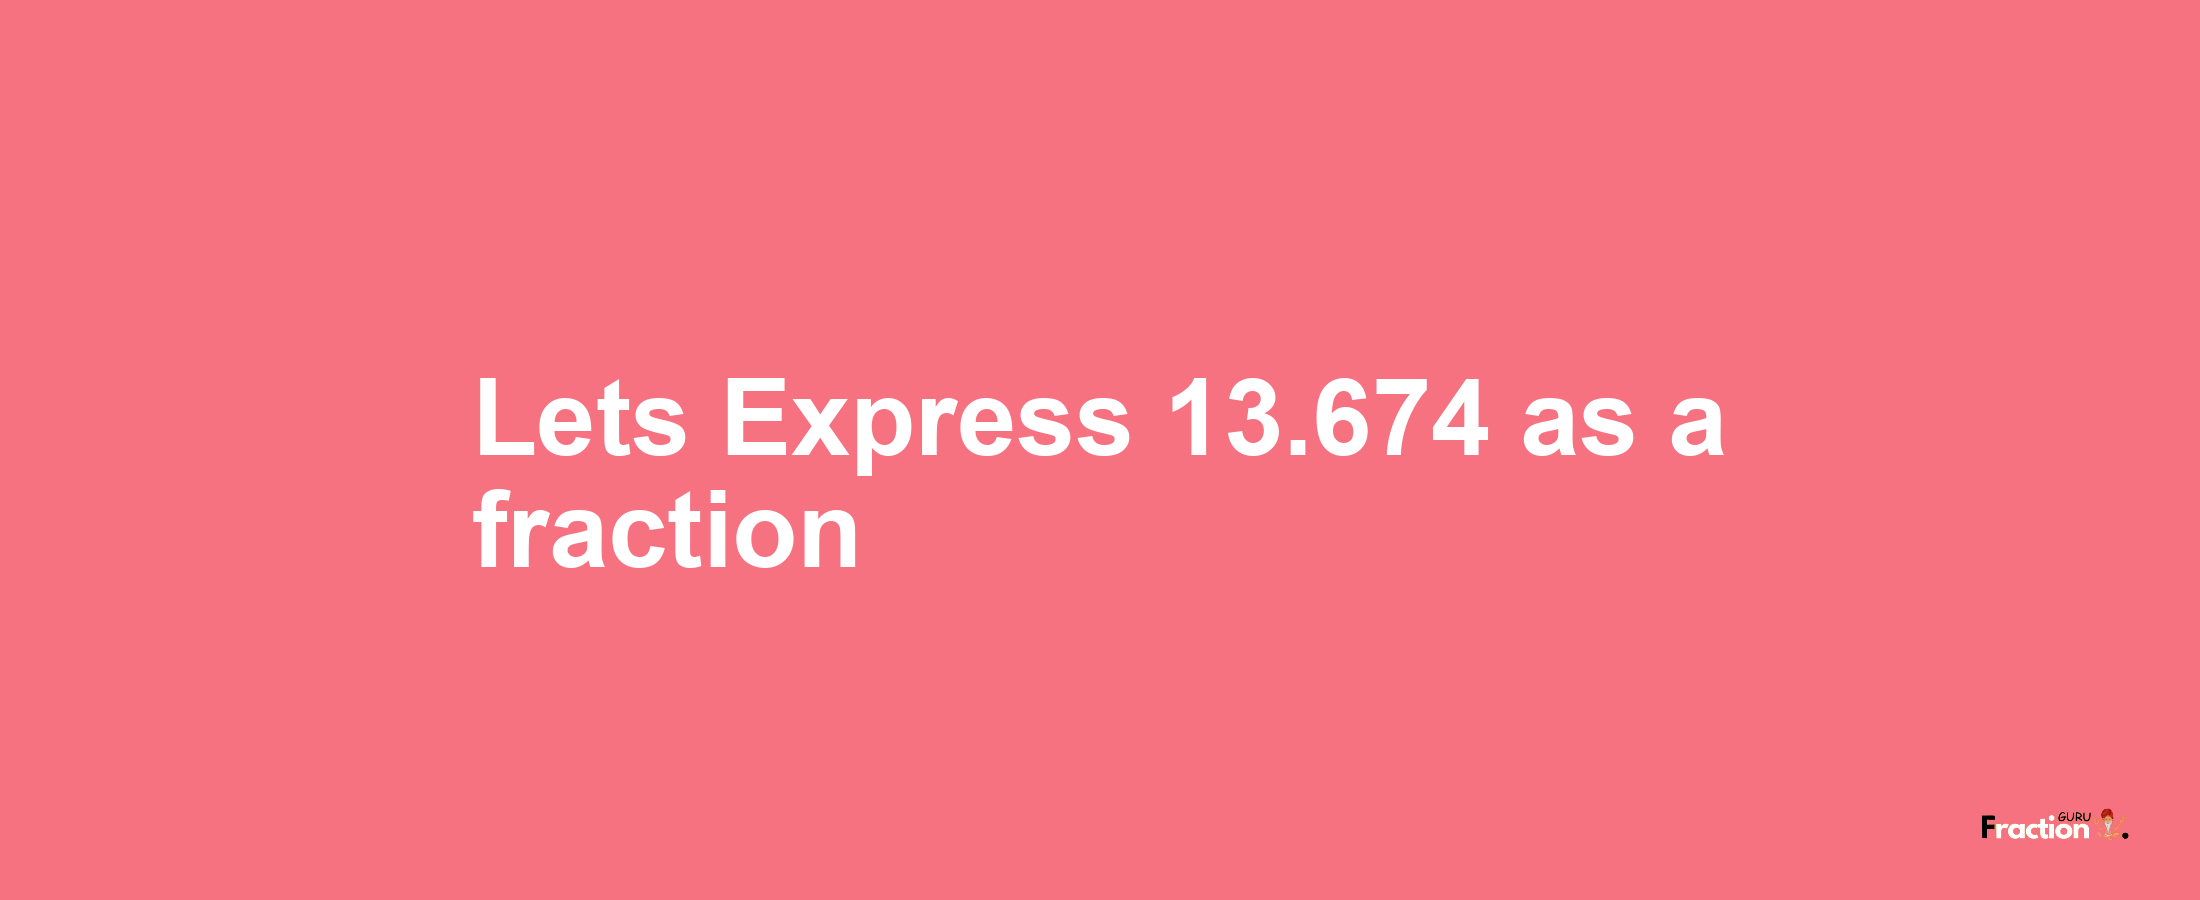 Lets Express 13.674 as afraction